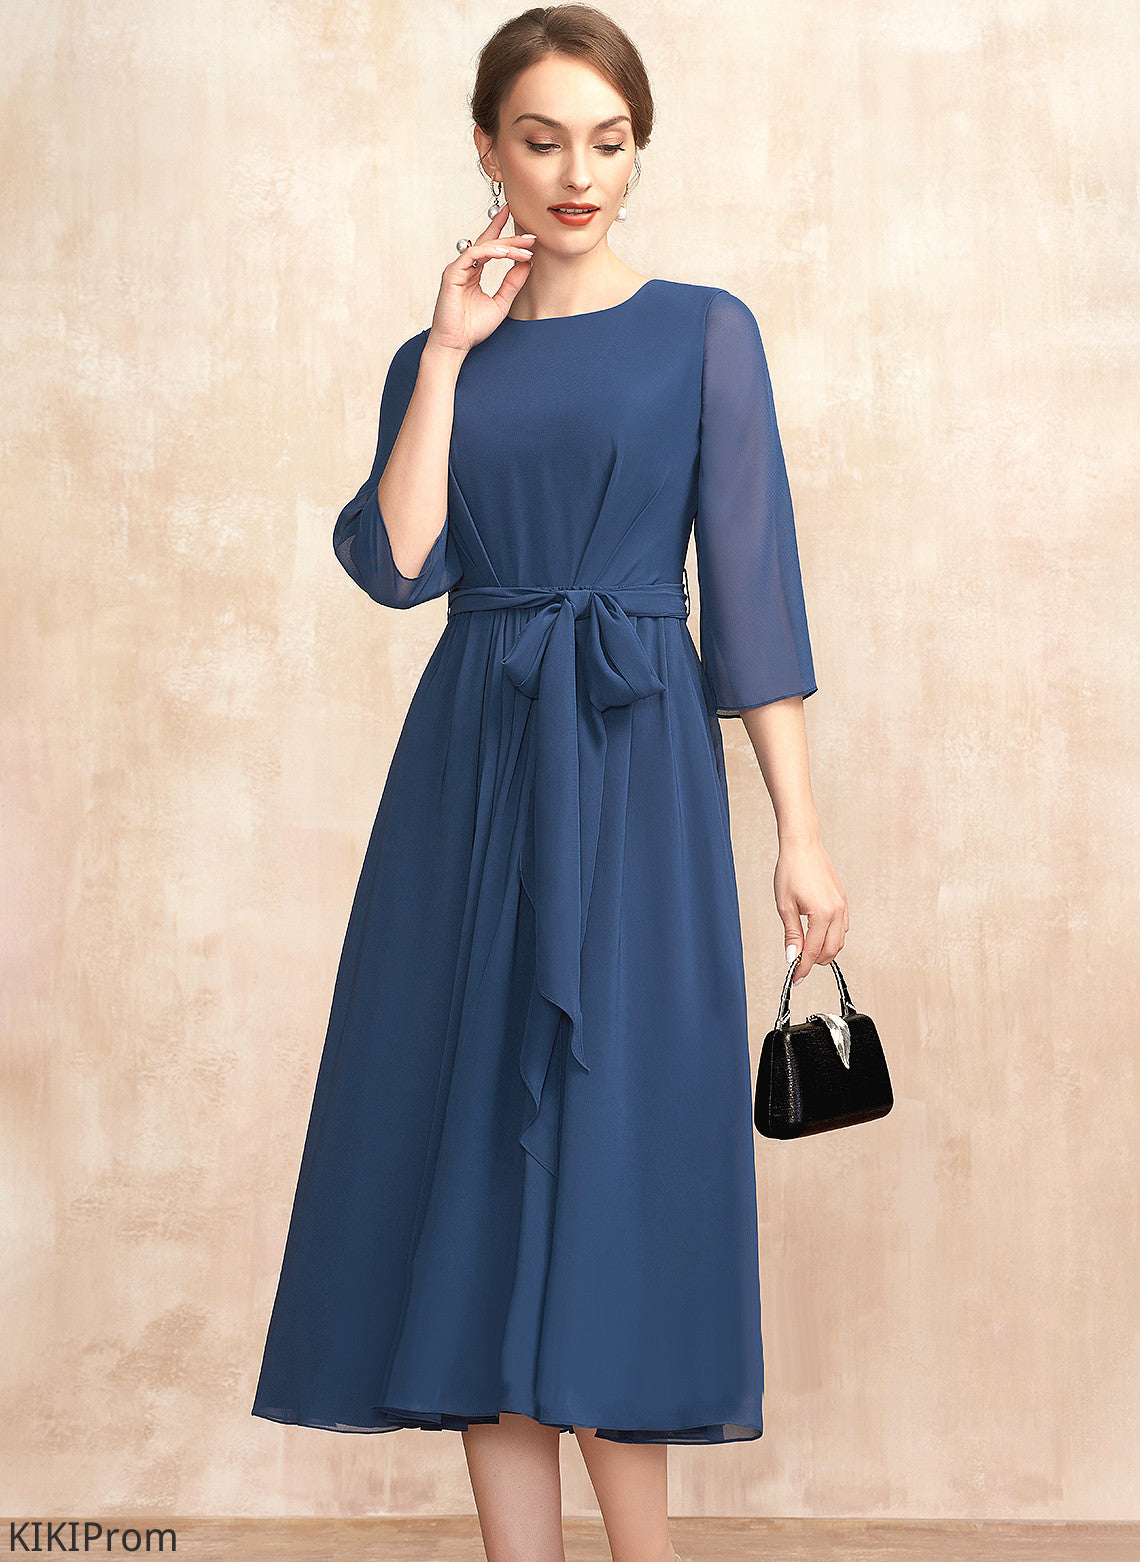 Neck of Dress With Bride Bow(s) the A-Line Ruffle Chiffon Tea-Length Erin Scoop Mother of the Bride Dresses Mother